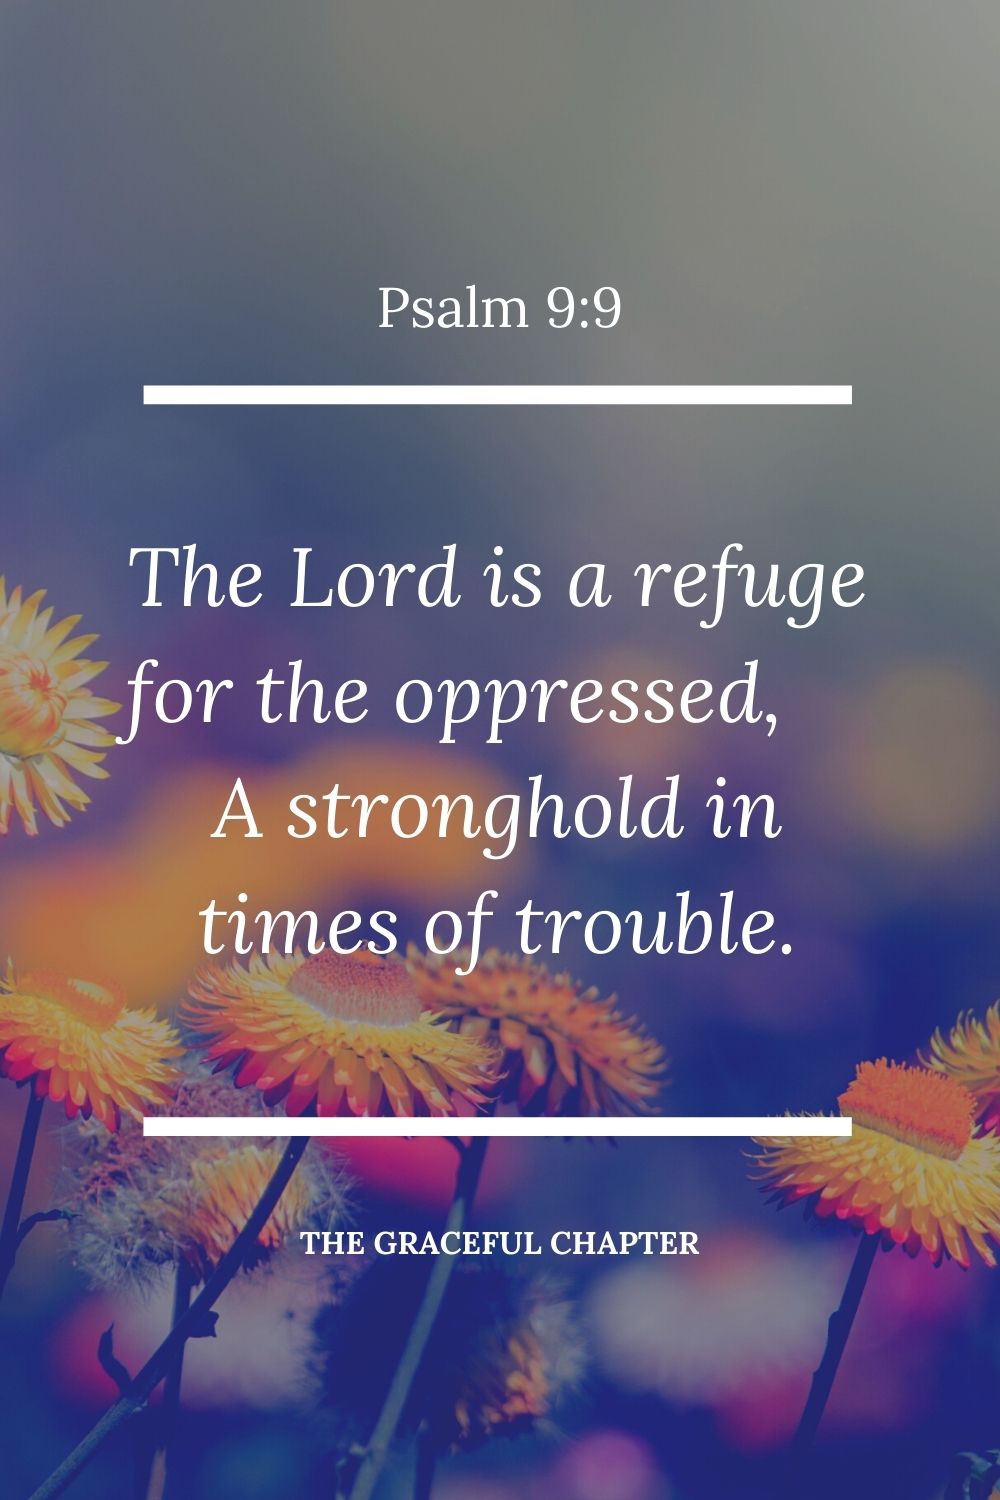 The Lord is a refuge for the oppressed, a stronghold in times of trouble. Psalm 9:9